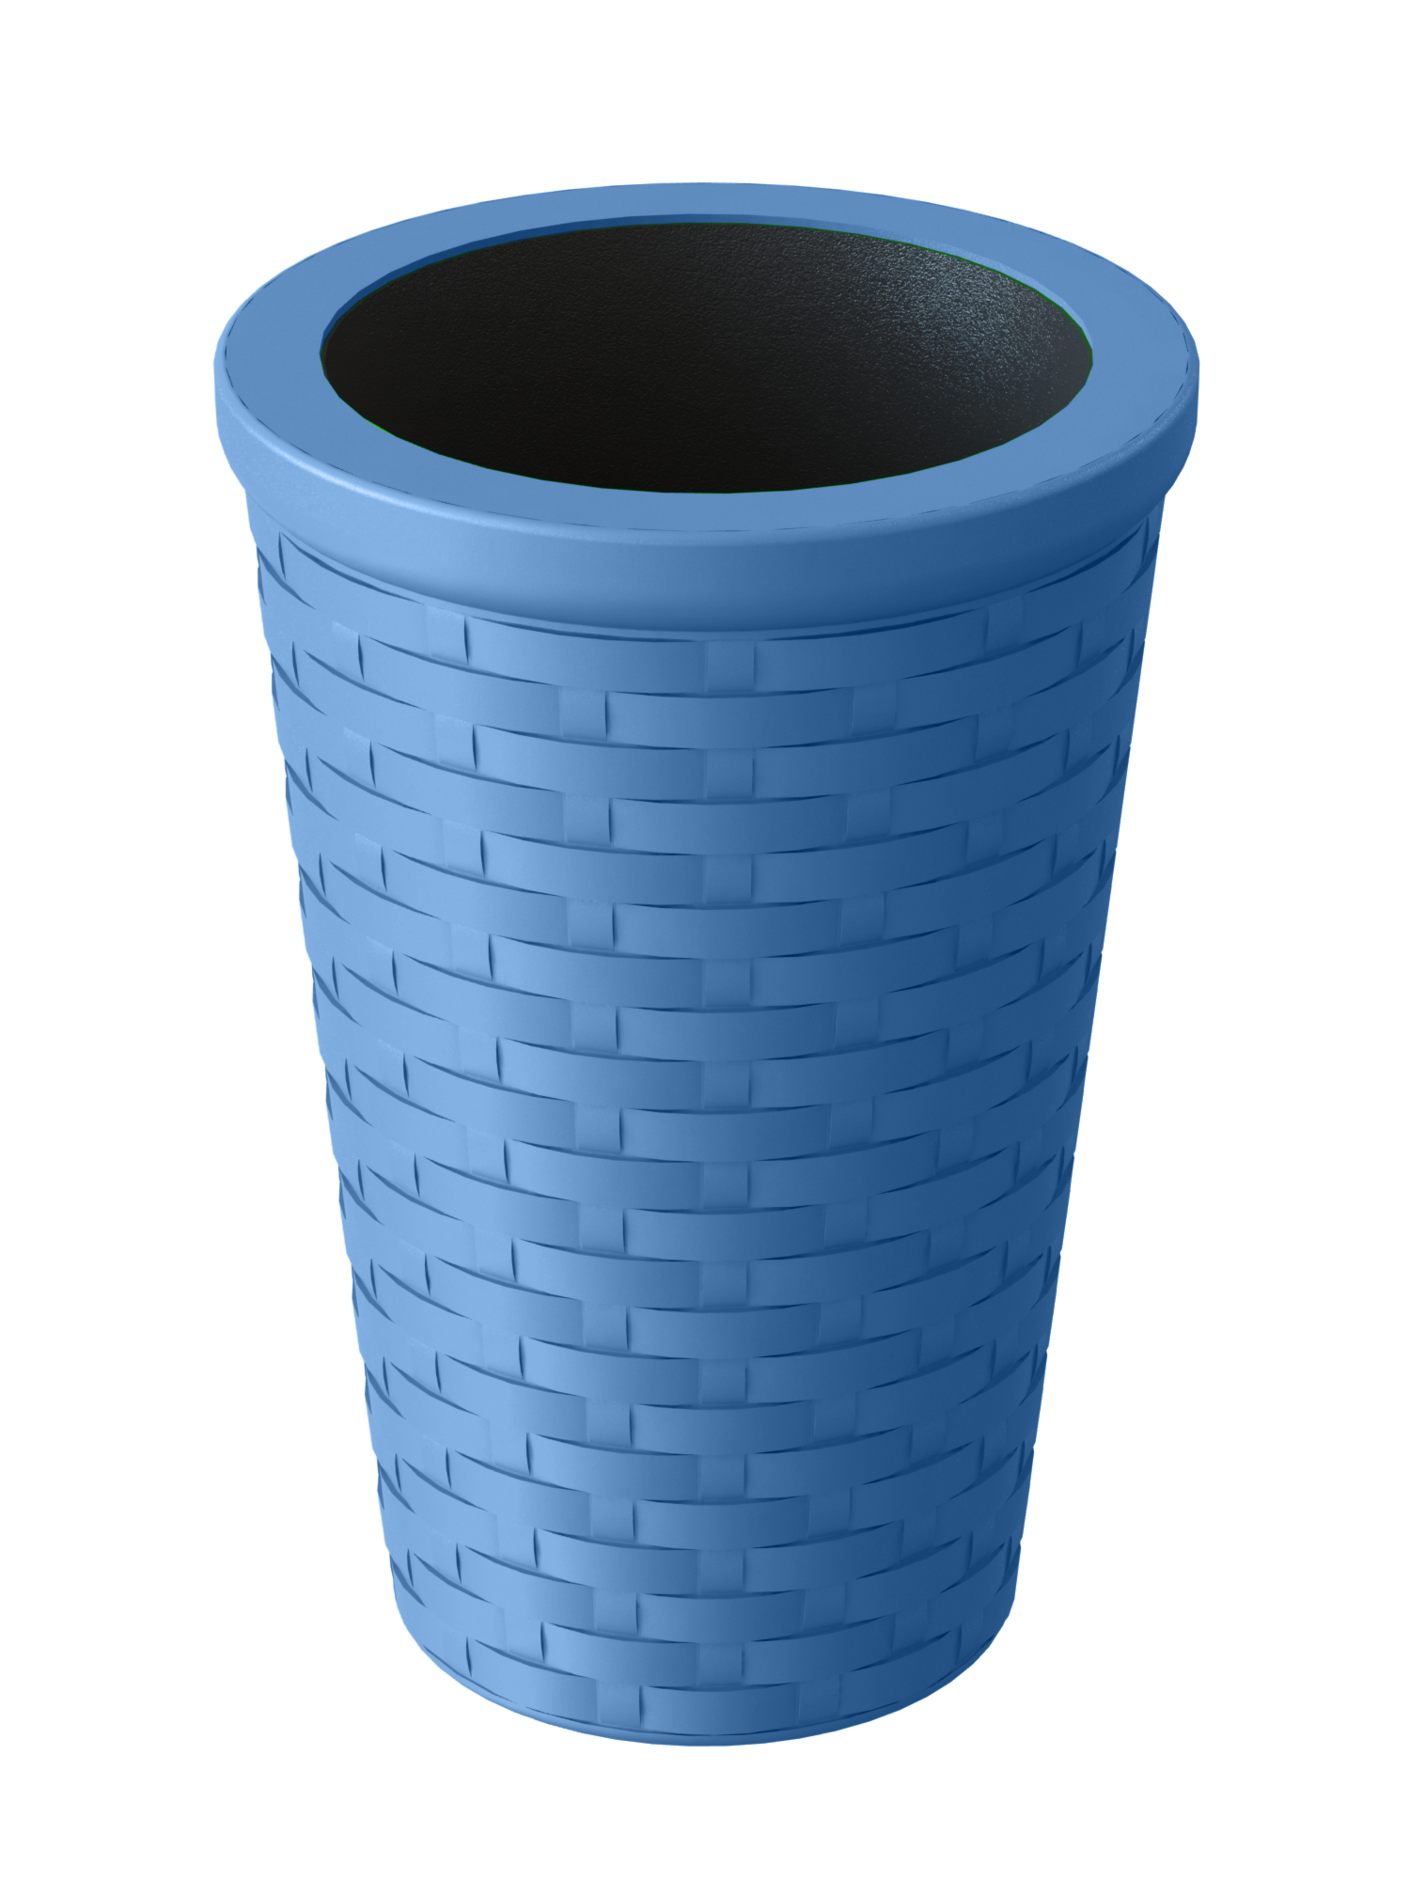 cups clipart blank